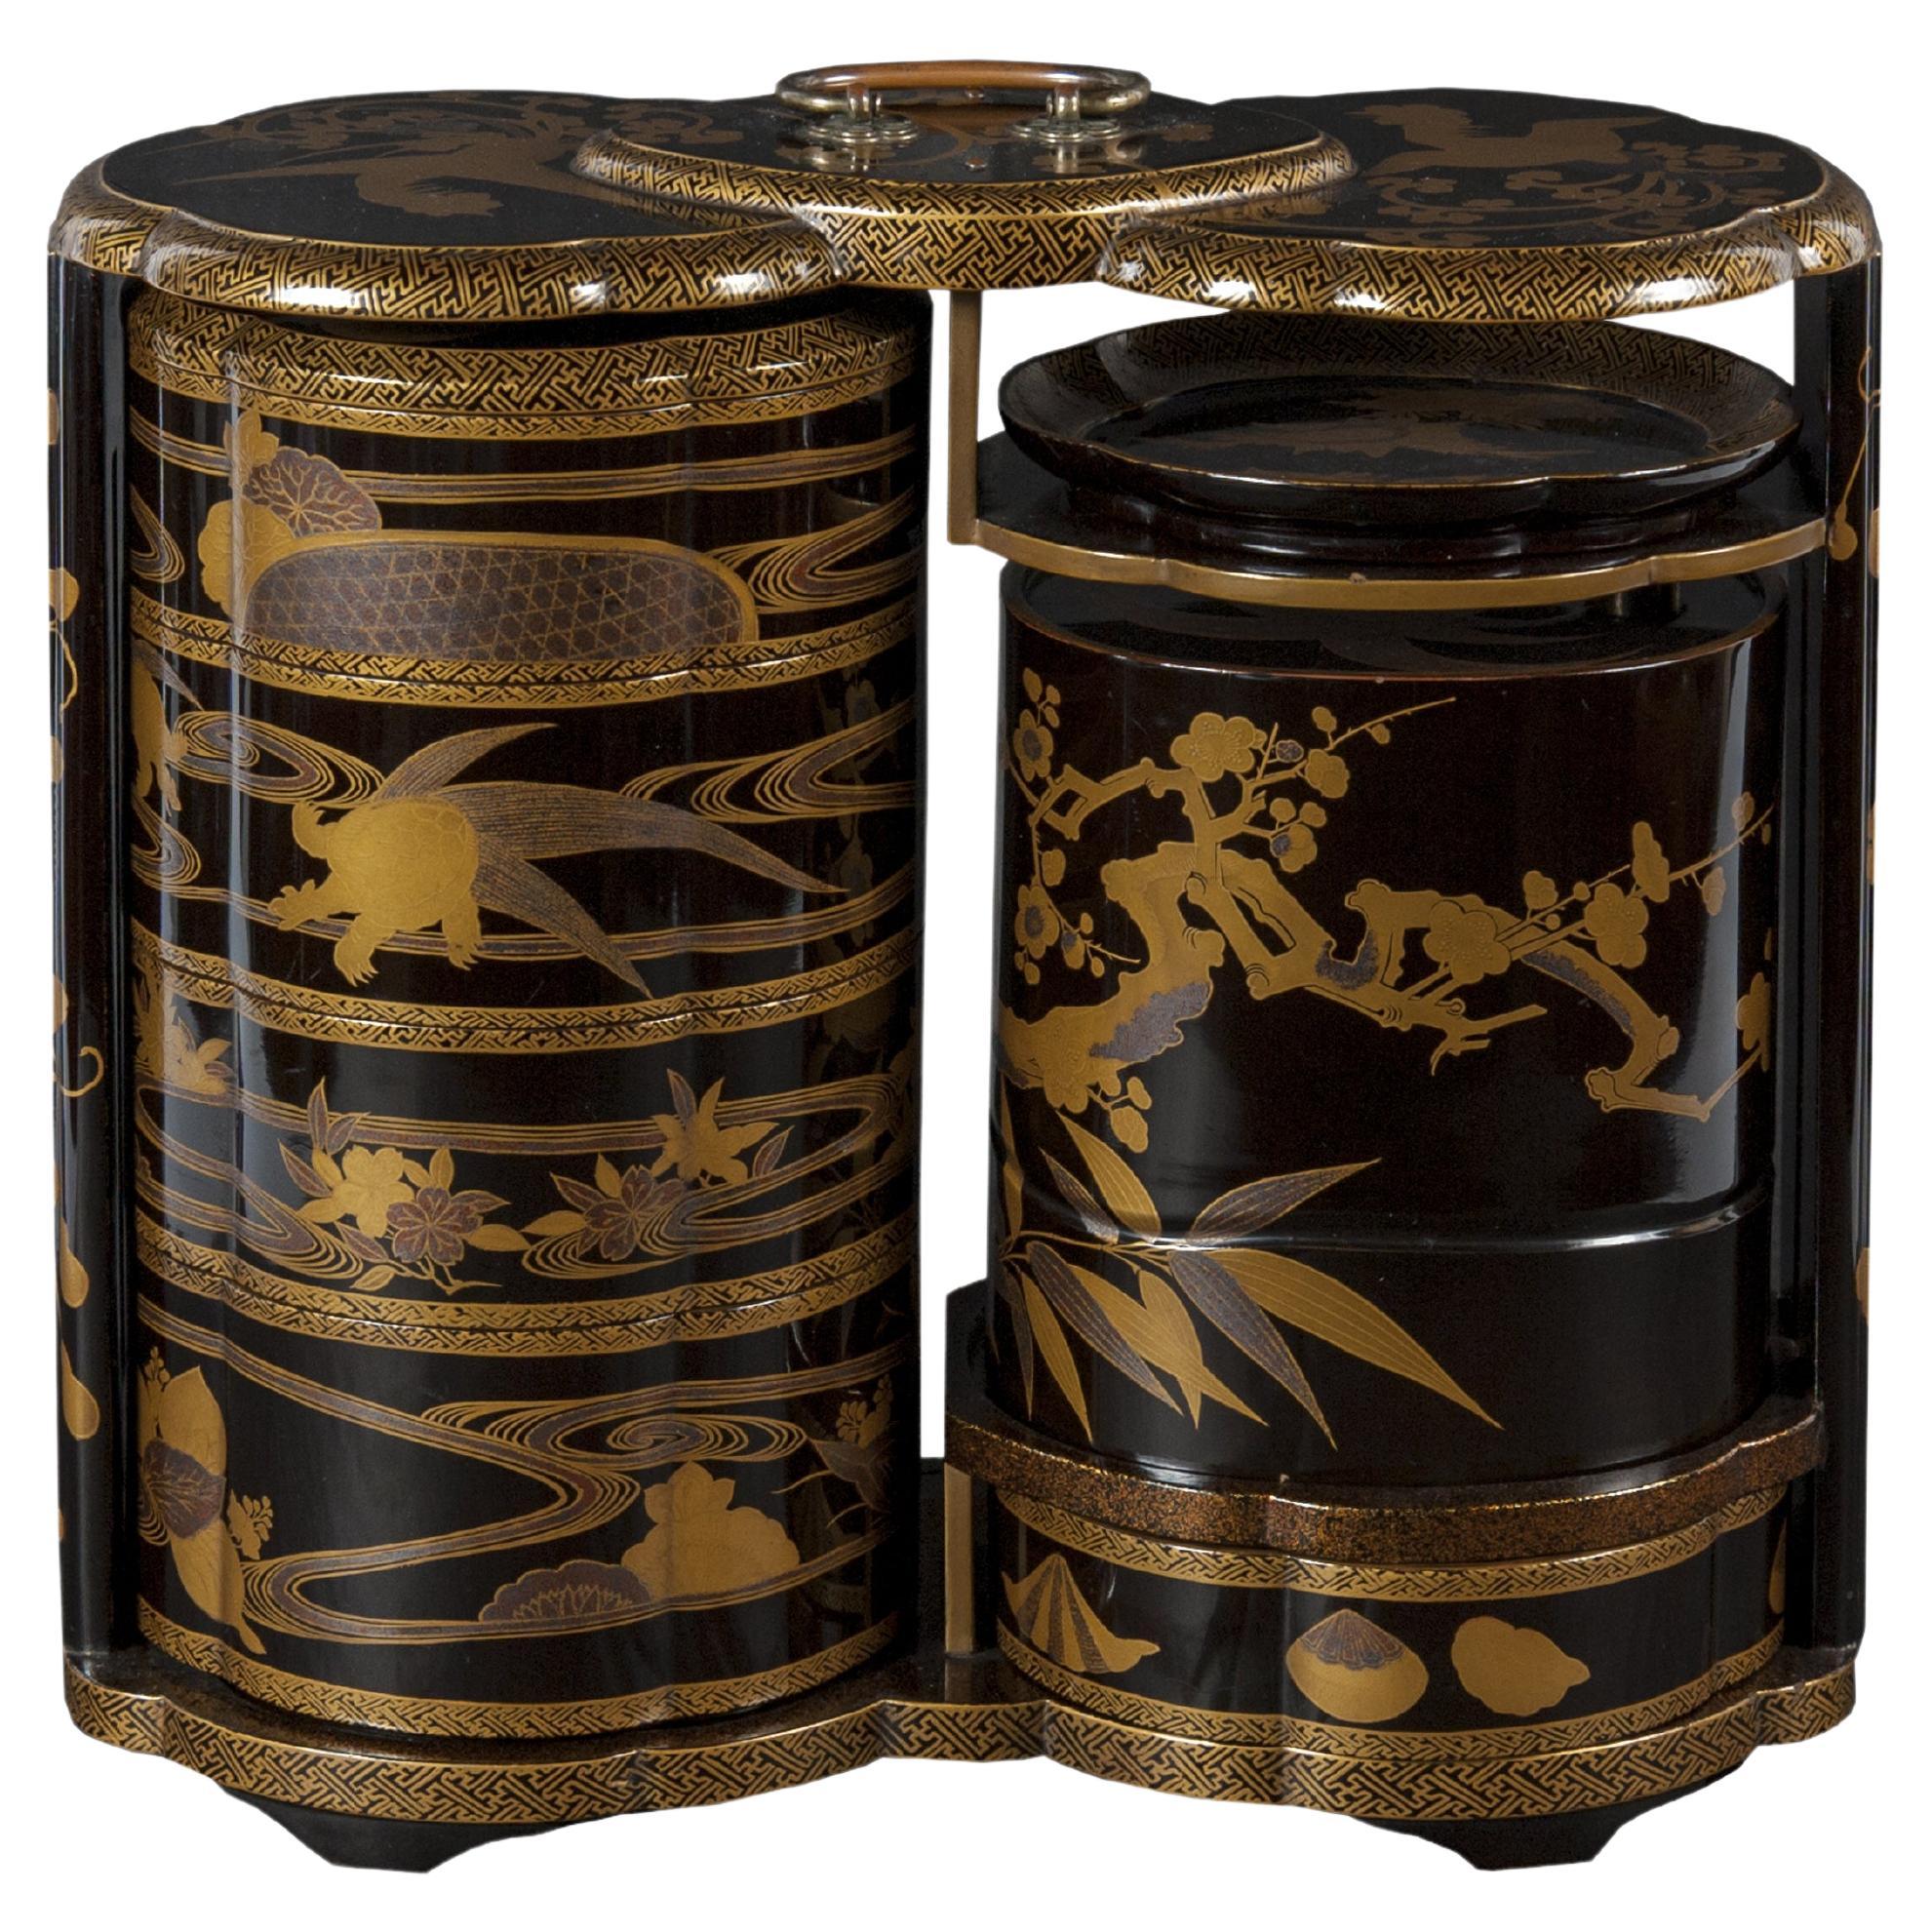 Fine Japanese Black and Gold Lacquer Sageju-Bako - Picnic Box For Sale